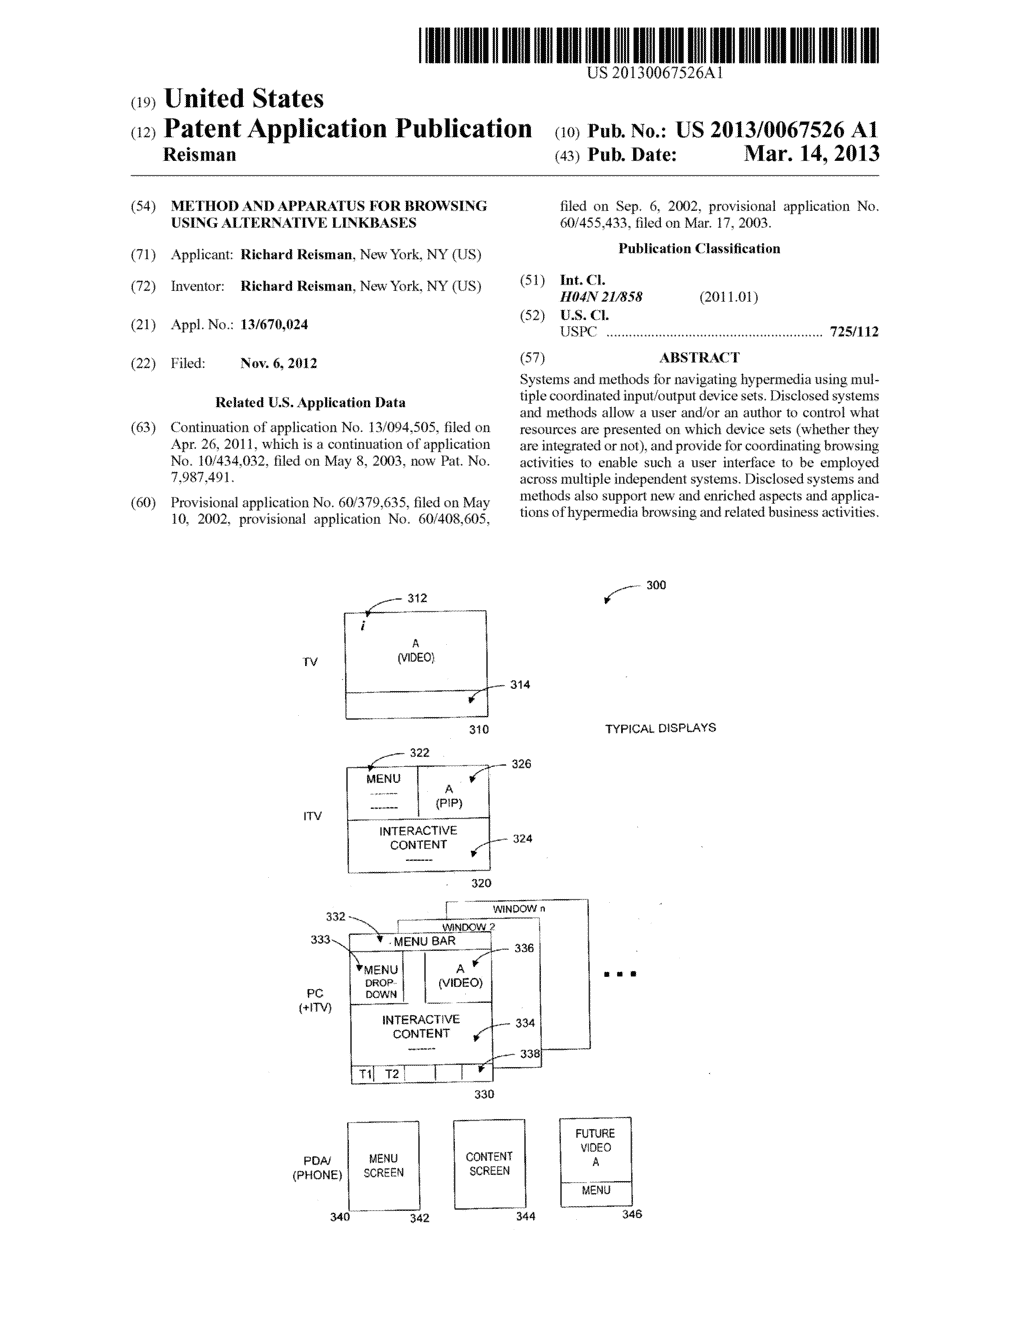 Method and Apparatus for Browsing Using Alternative Linkbases - diagram, schematic, and image 01